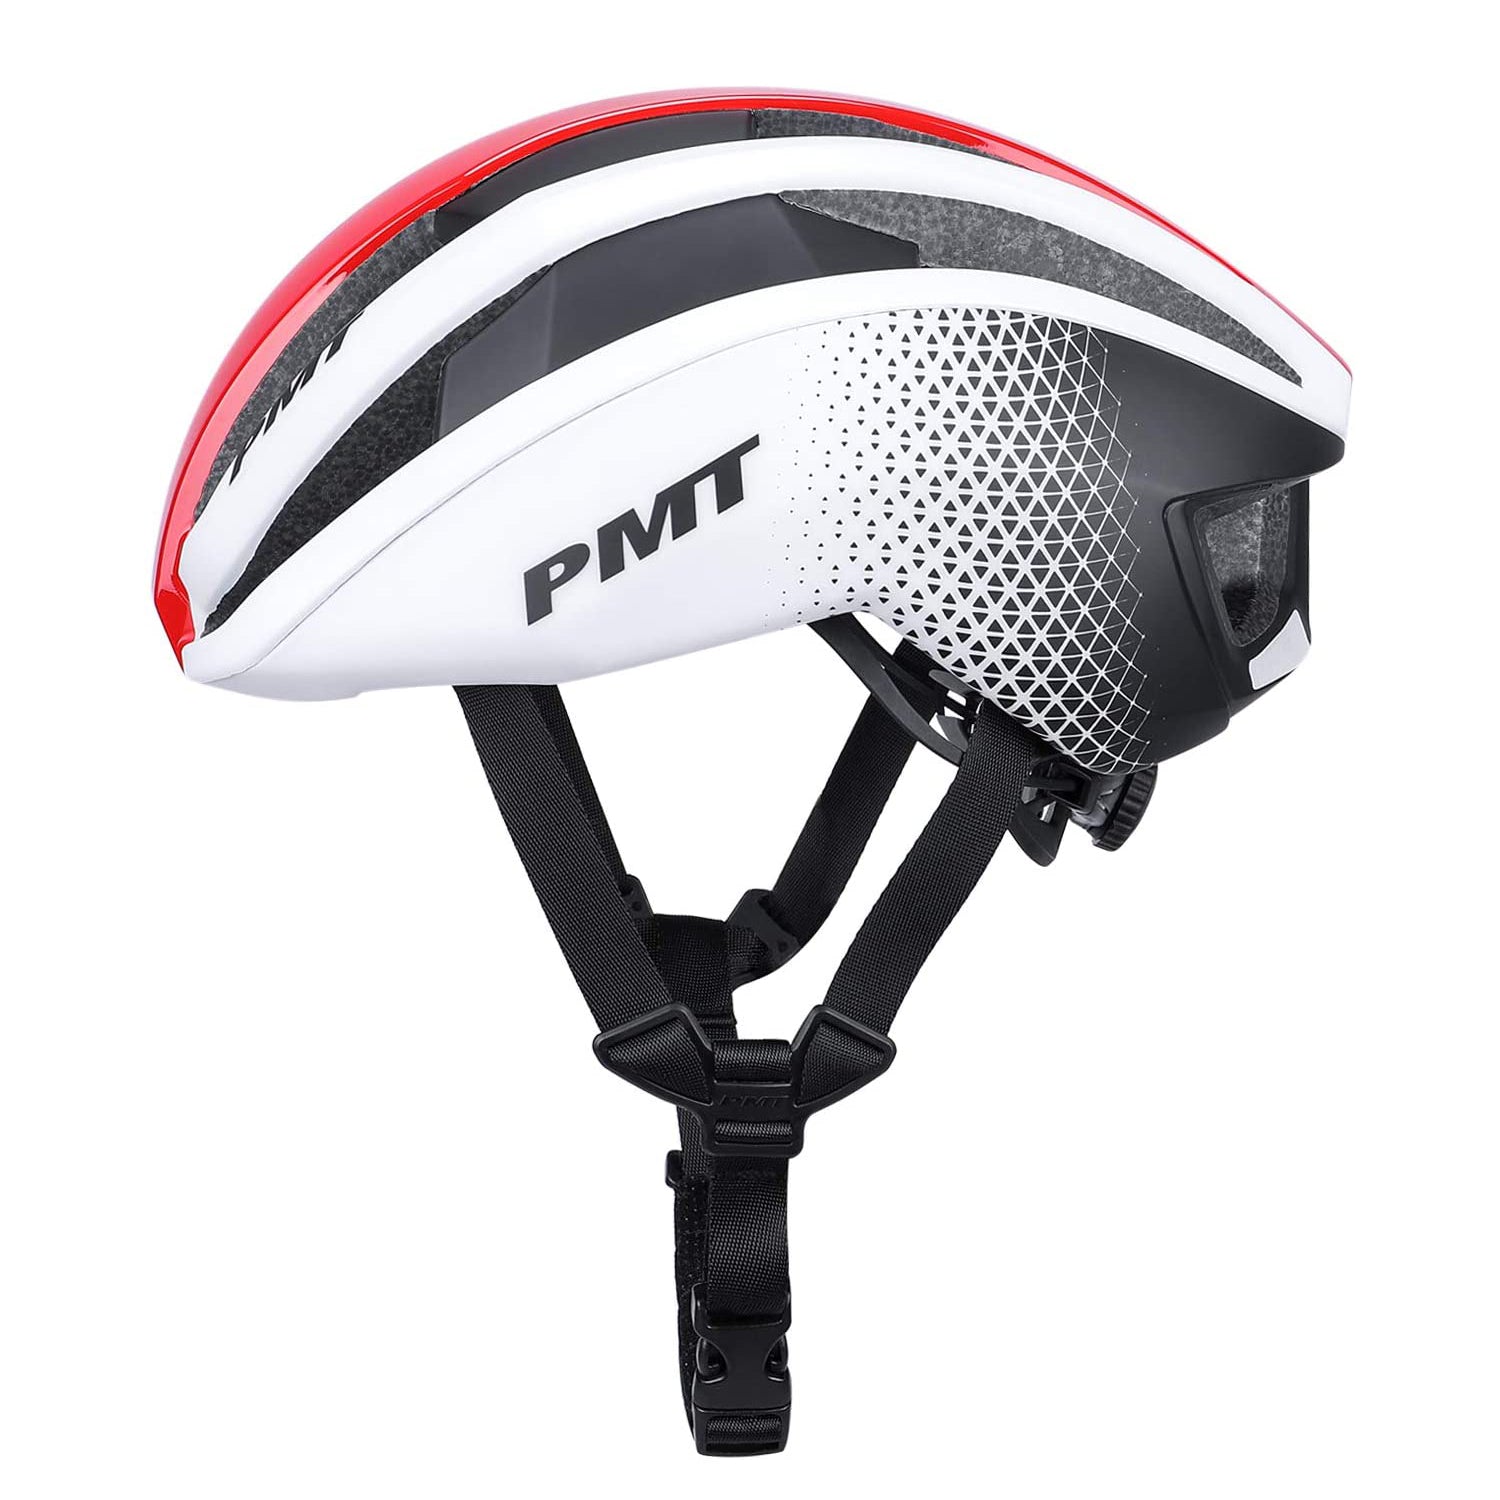 Bike Helmets for Adults - Bicycle Helmet Safety Protection - Adjustable Lightweight Adults Mountain/Road Bike Helmet